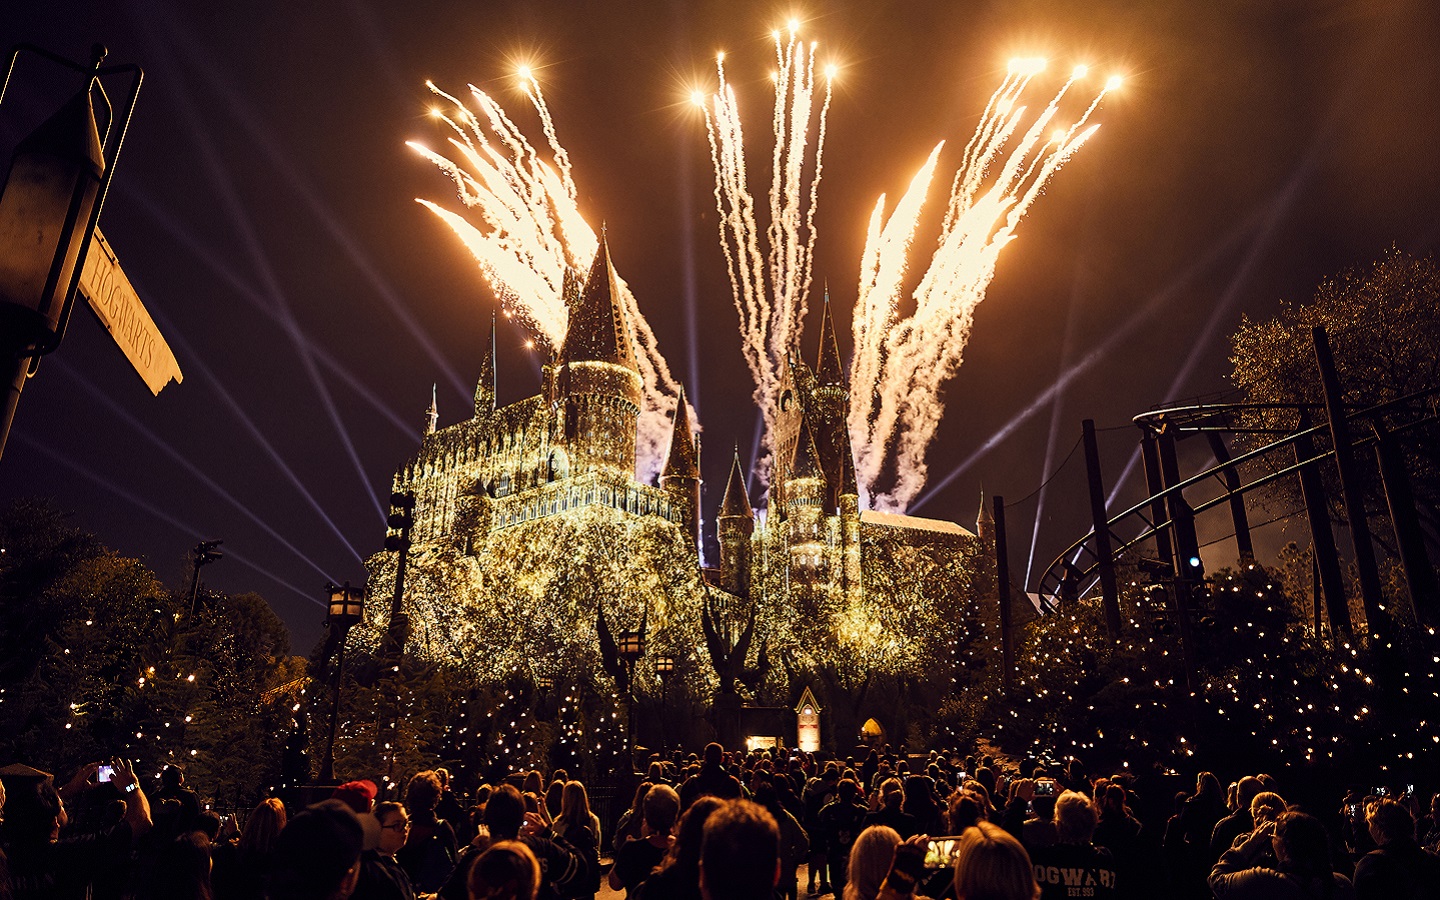 Four Houses Show on castle, The Nighttime Lights at Hogwarts™ Castle, The Wizarding World of Harry Potter - Hogsmeade, WWHM, HM, The Wizarding World of Harry Potter, WWHP, WWoHP, Universal's Islands of Adventure, IOA, Universal Orlando Resort, UOR, UO